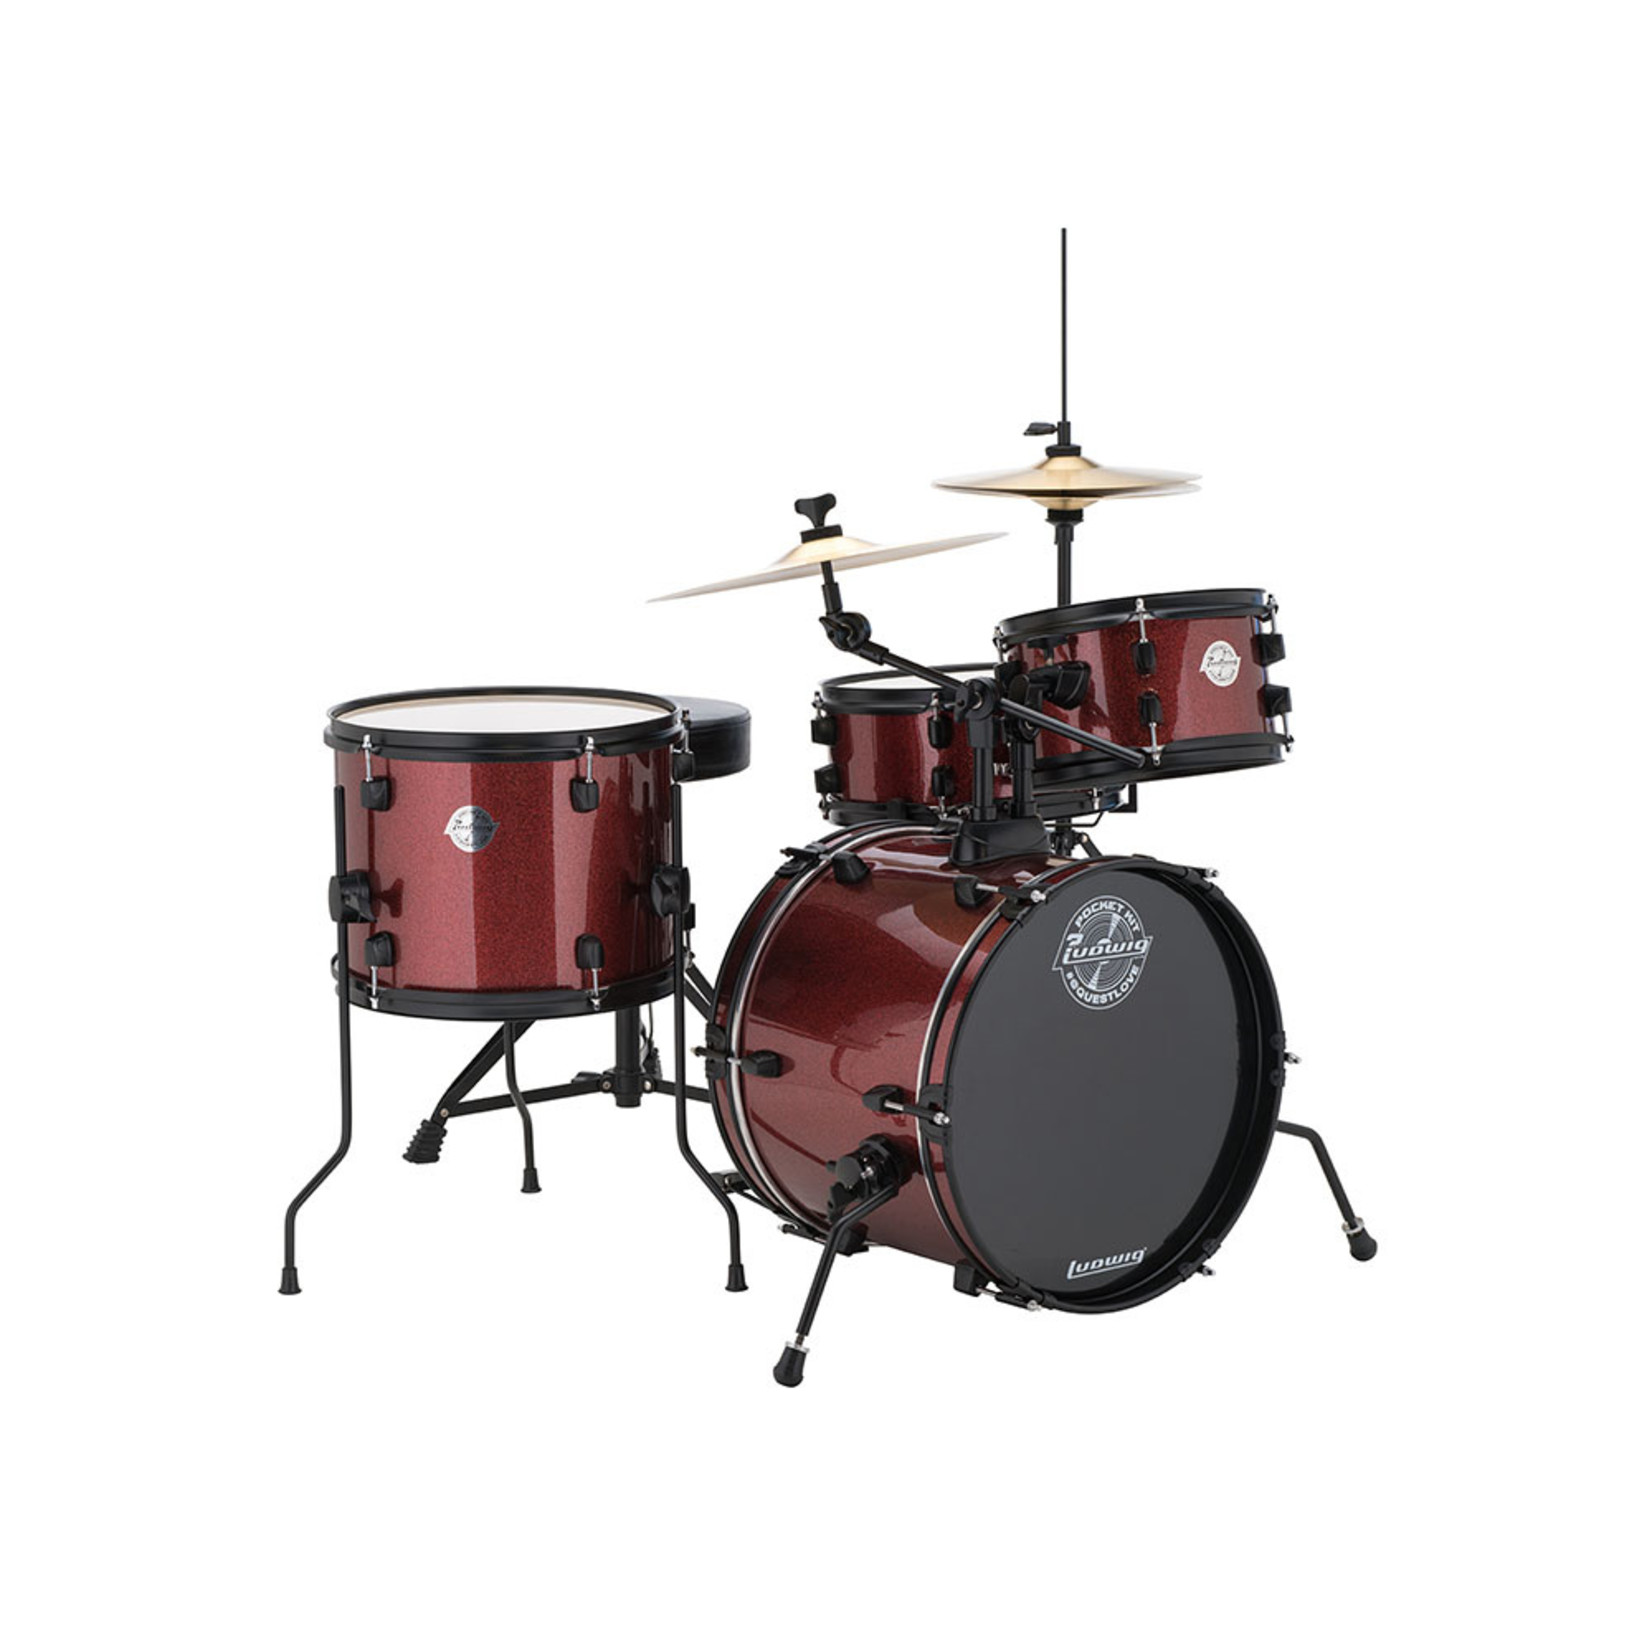 Ludwig Ludwig Pocket Kit Complete LC178XO25 (Red Sparkle)